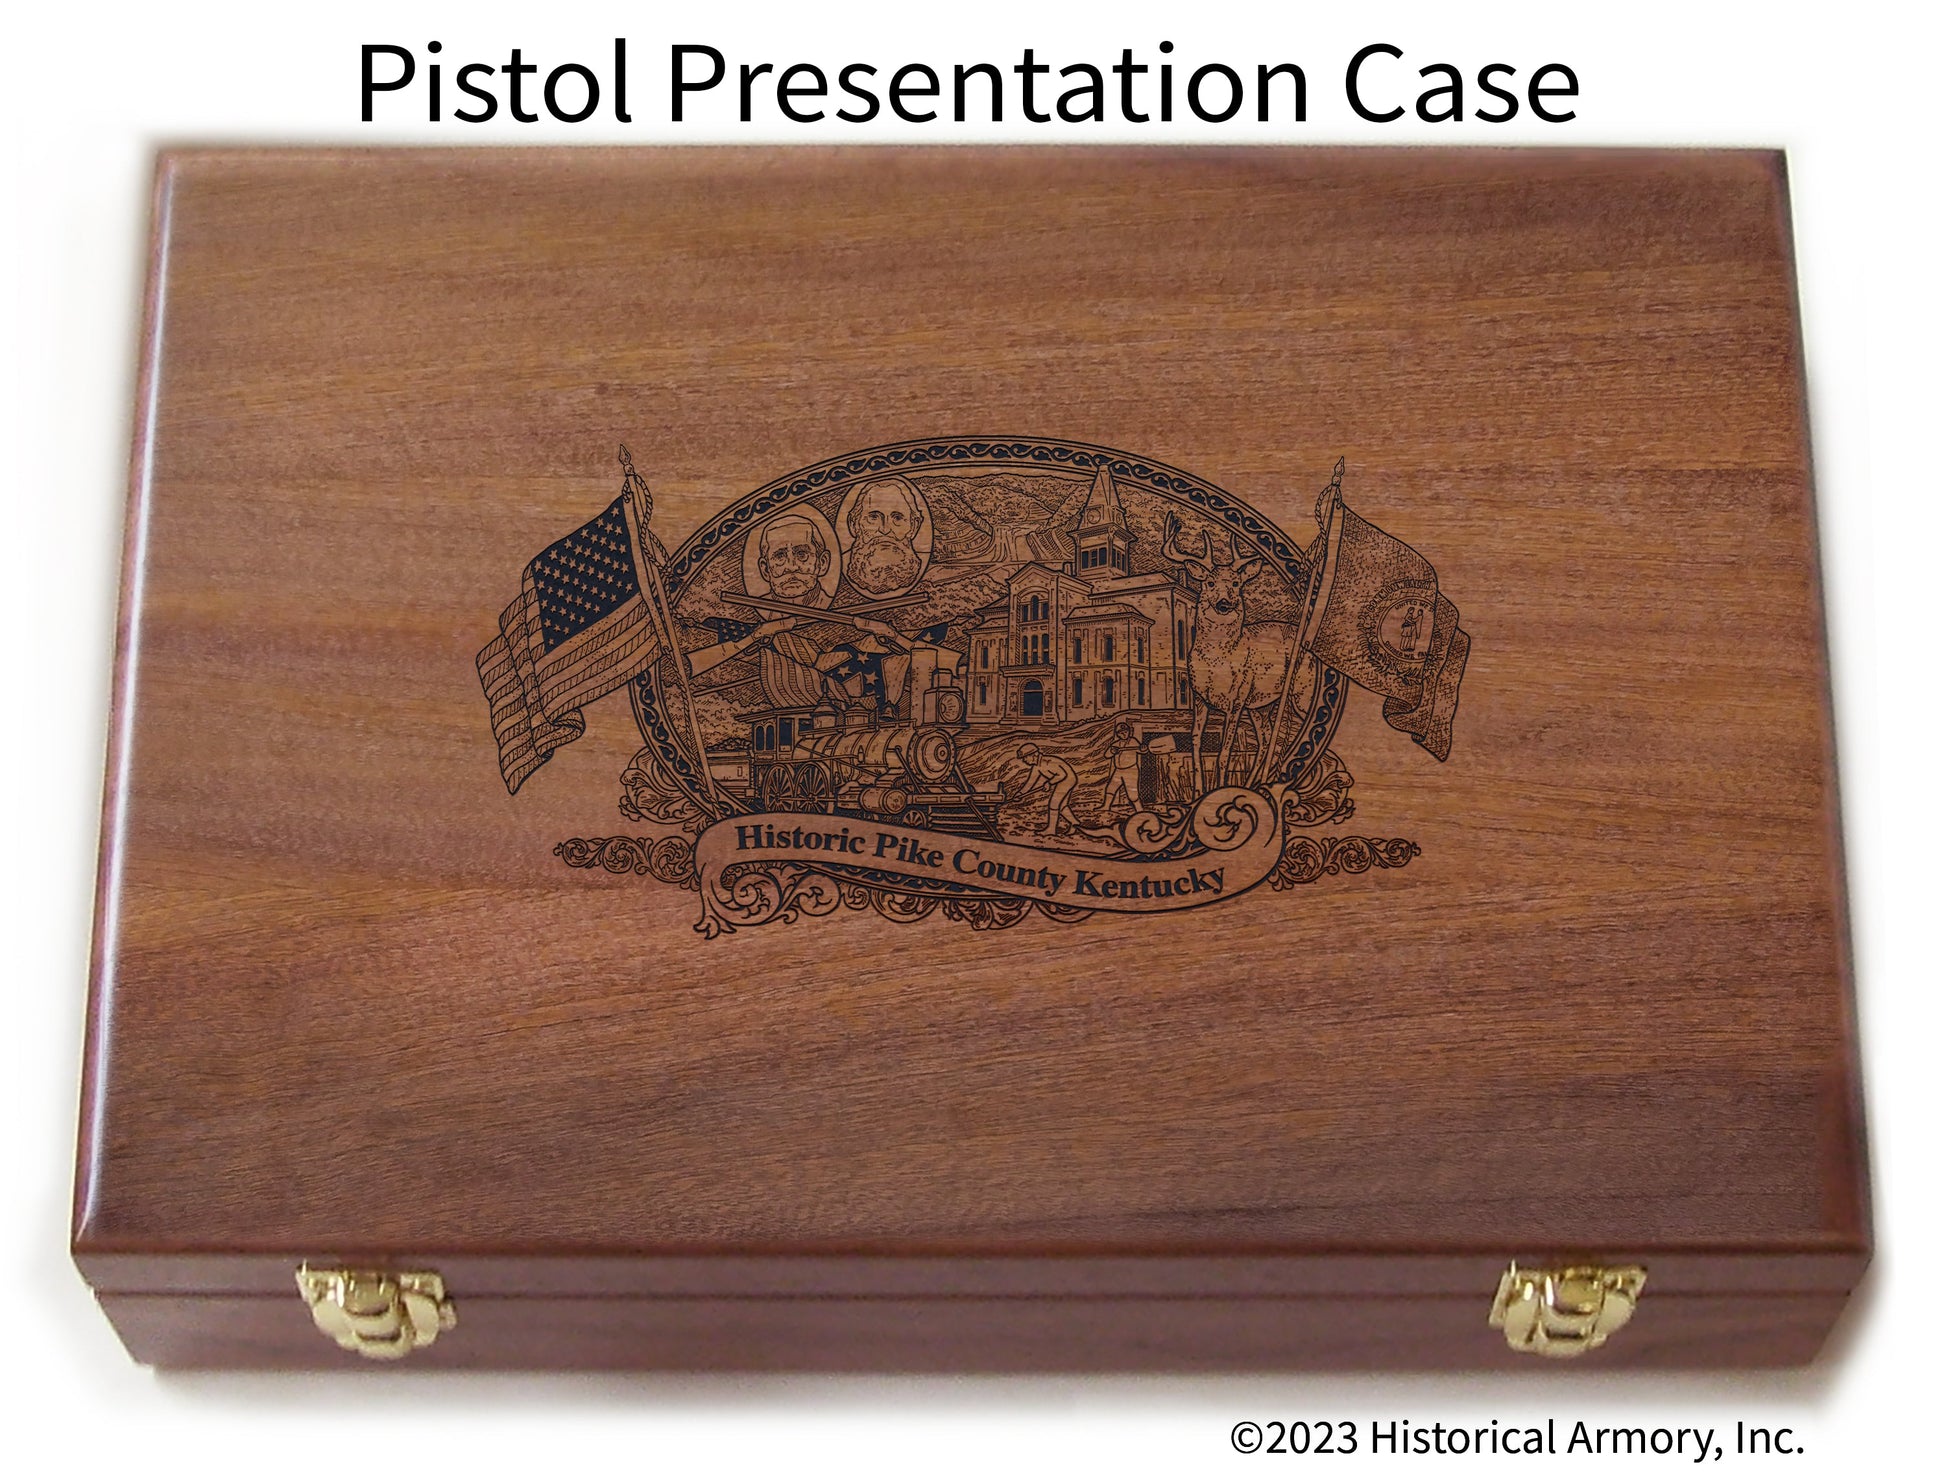 Pike County Kentucky Engraved .45 Auto Ruger 1911 Presentation Case